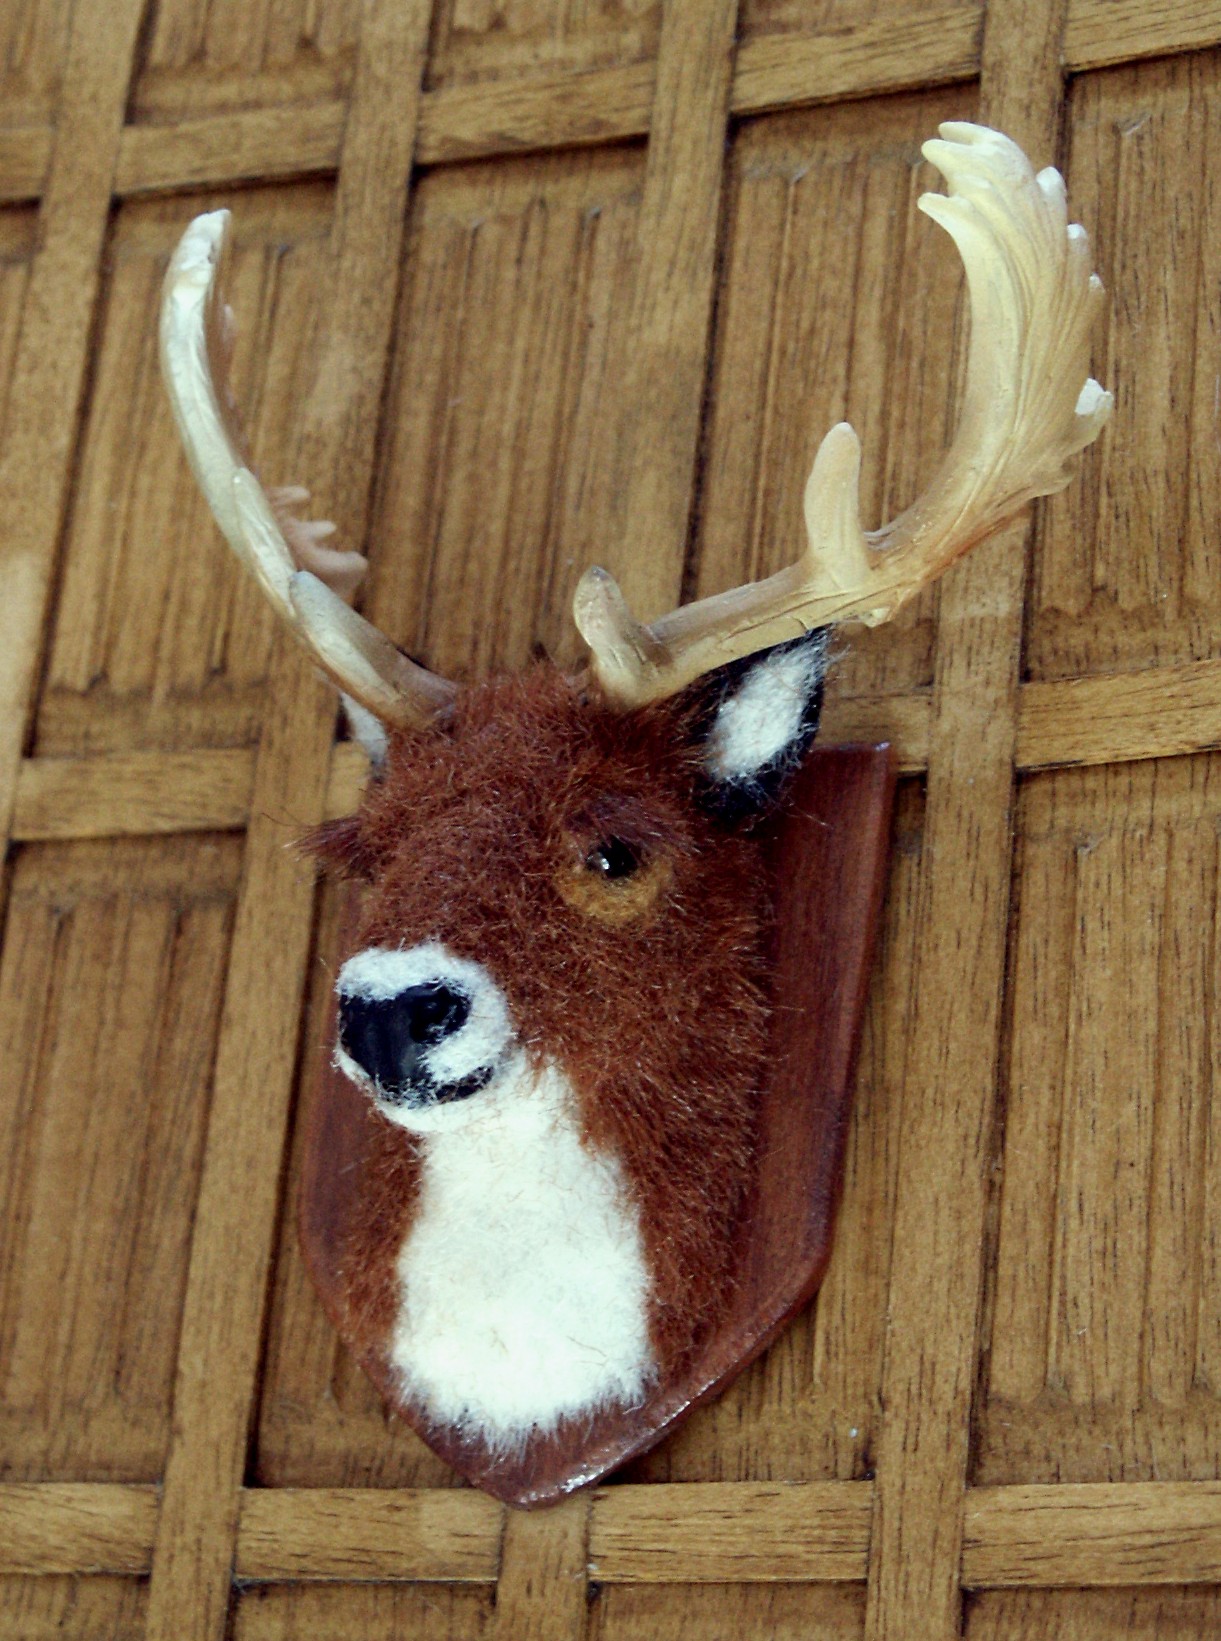 Stags head for the dolls house